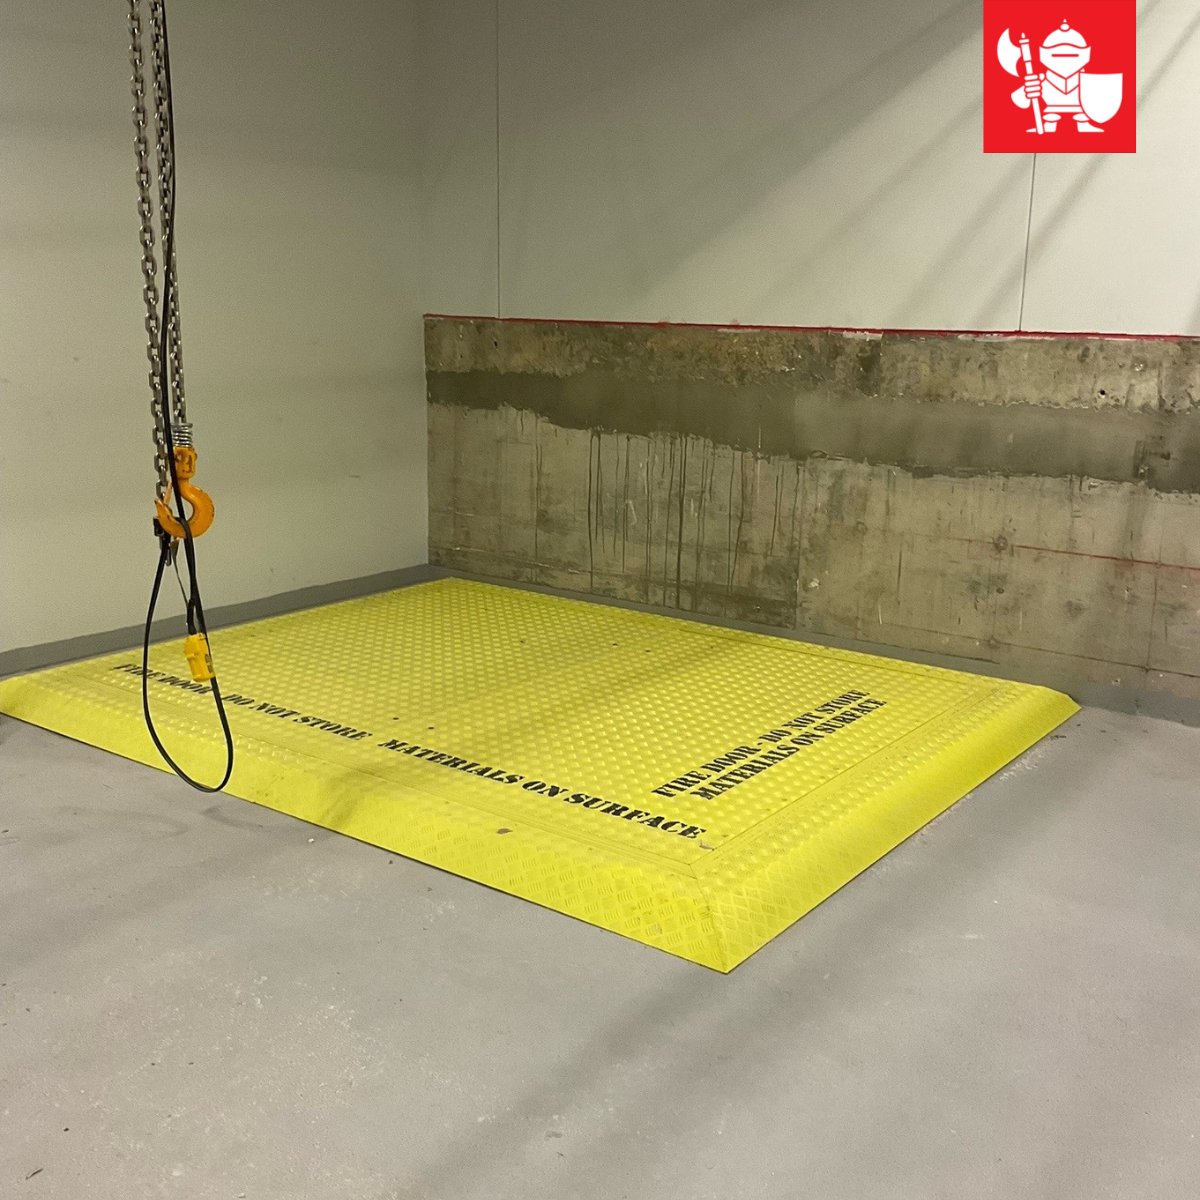 It's everyone's favourite time of the day! New site photos!
This SACE Floor hatch has been installed at the Baylor St Luke Medical Centre in Houston, Texas and features a 3 hours fire rating.

@TheAmericanInstituteofArchitects @ARCAT_news 
 #AmericanArchitects #usconstruction